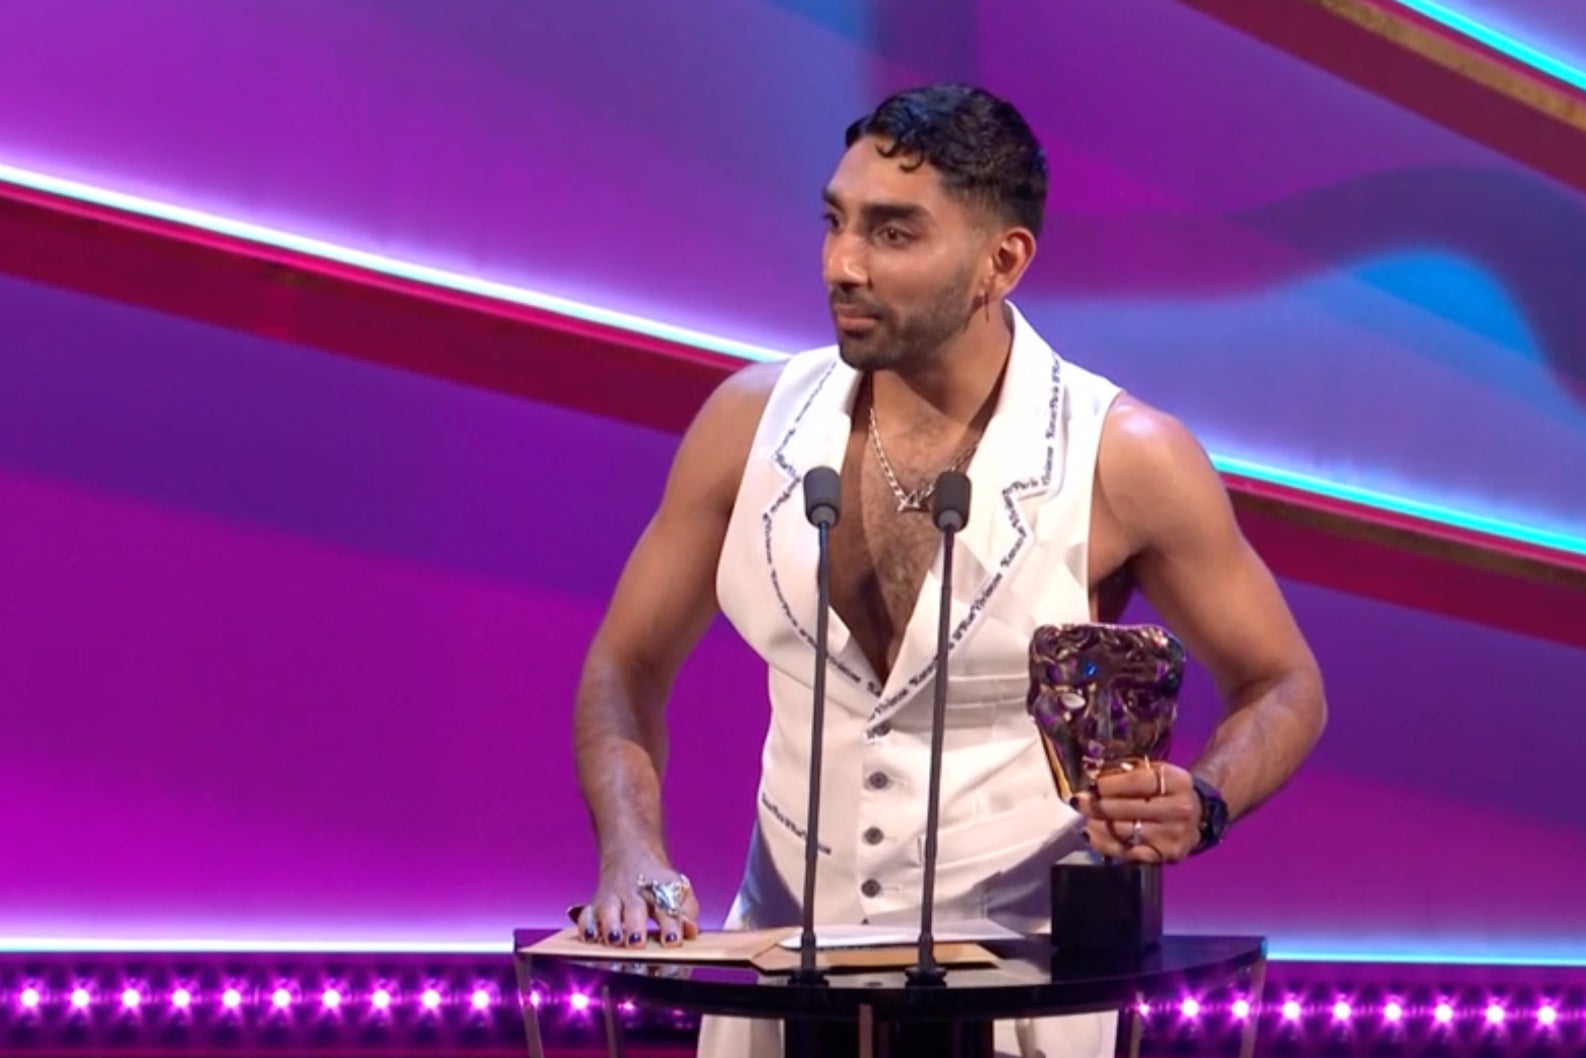 Mawaan Rizwan with his Bafta for Male Performance in a Comedy